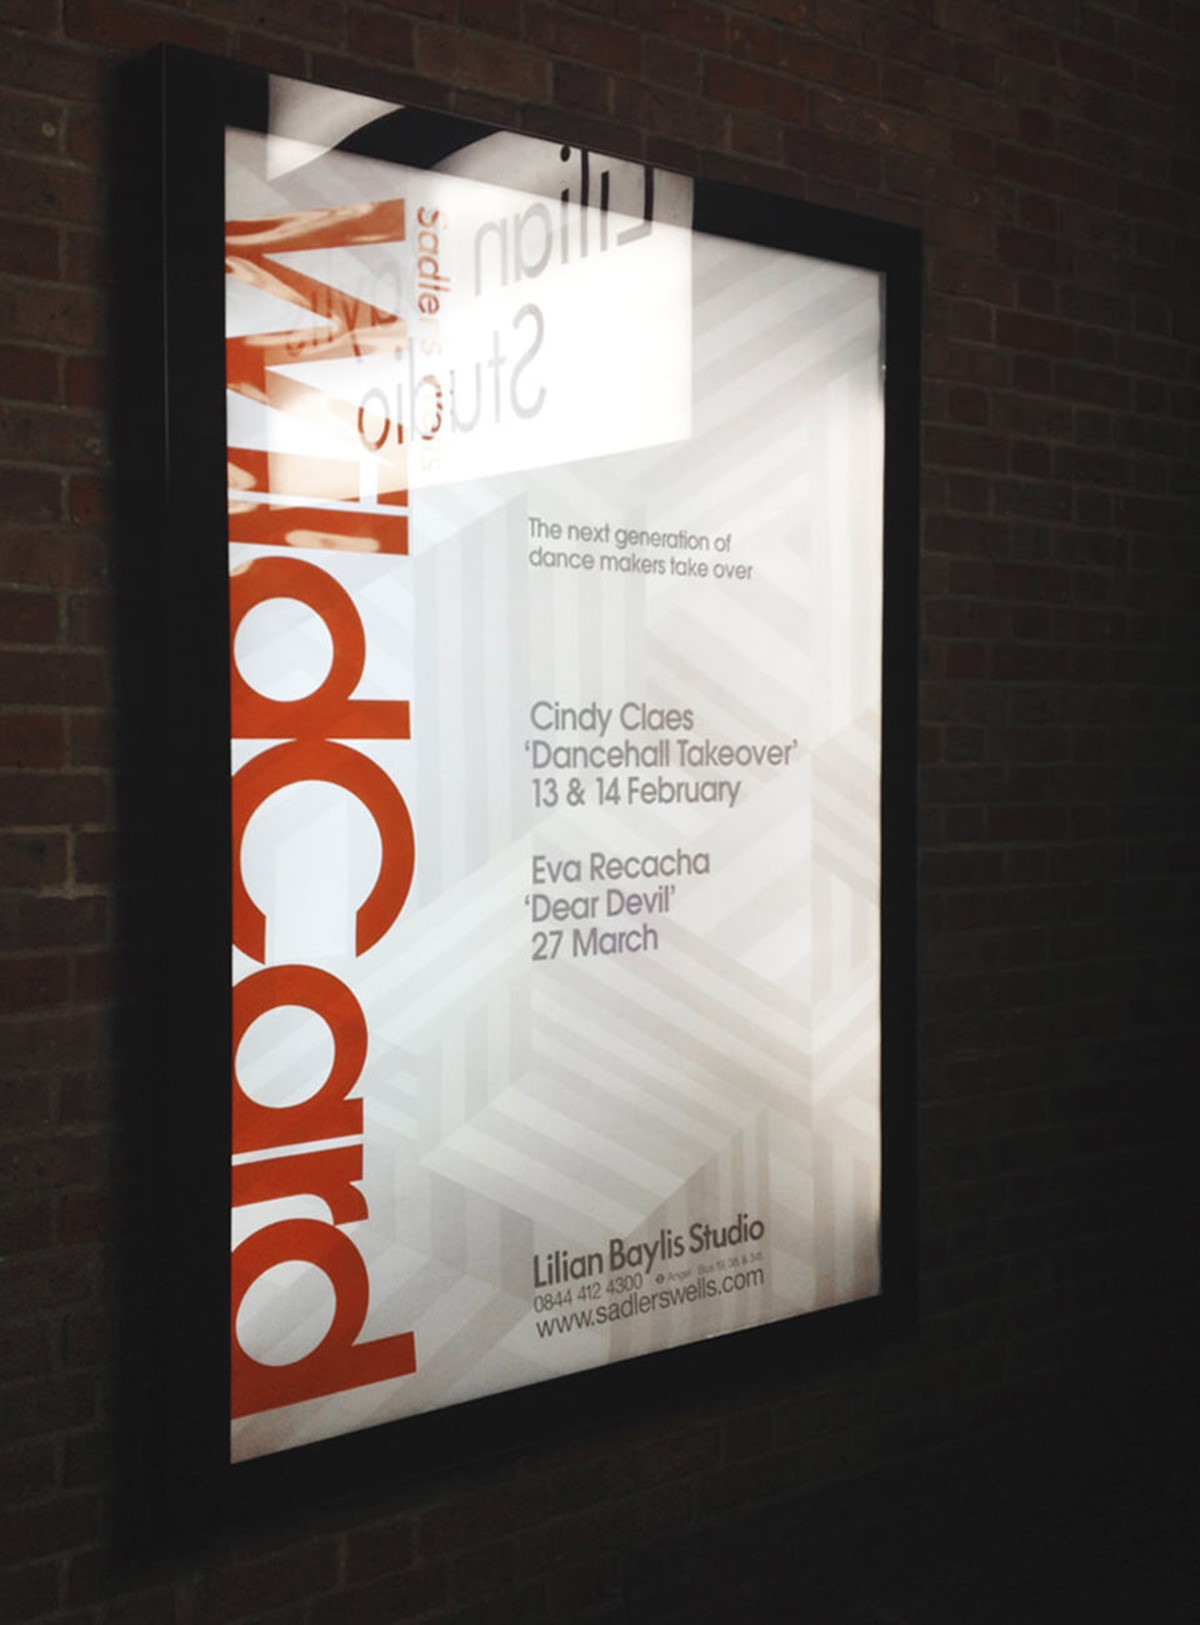 Sadler's Wells. Wildcard season 2. Outdoor poster backlit. Identity and design by Superfried. Manchester.